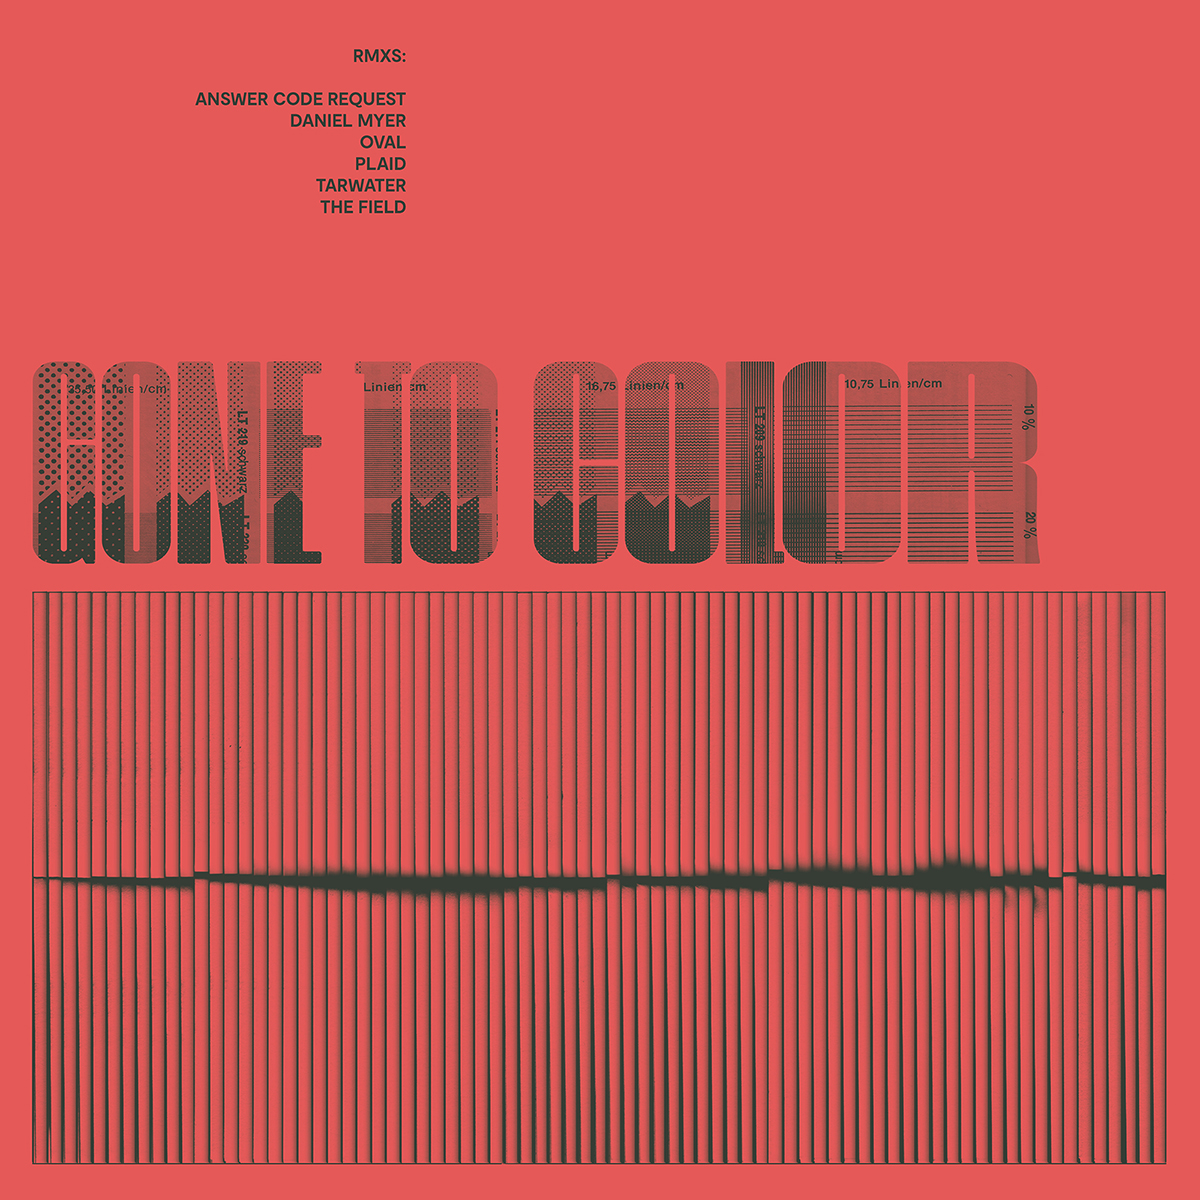 Hear The Field’s remix of Gone To Color’s “The 606” feat. Jessie Stein of The Luyas